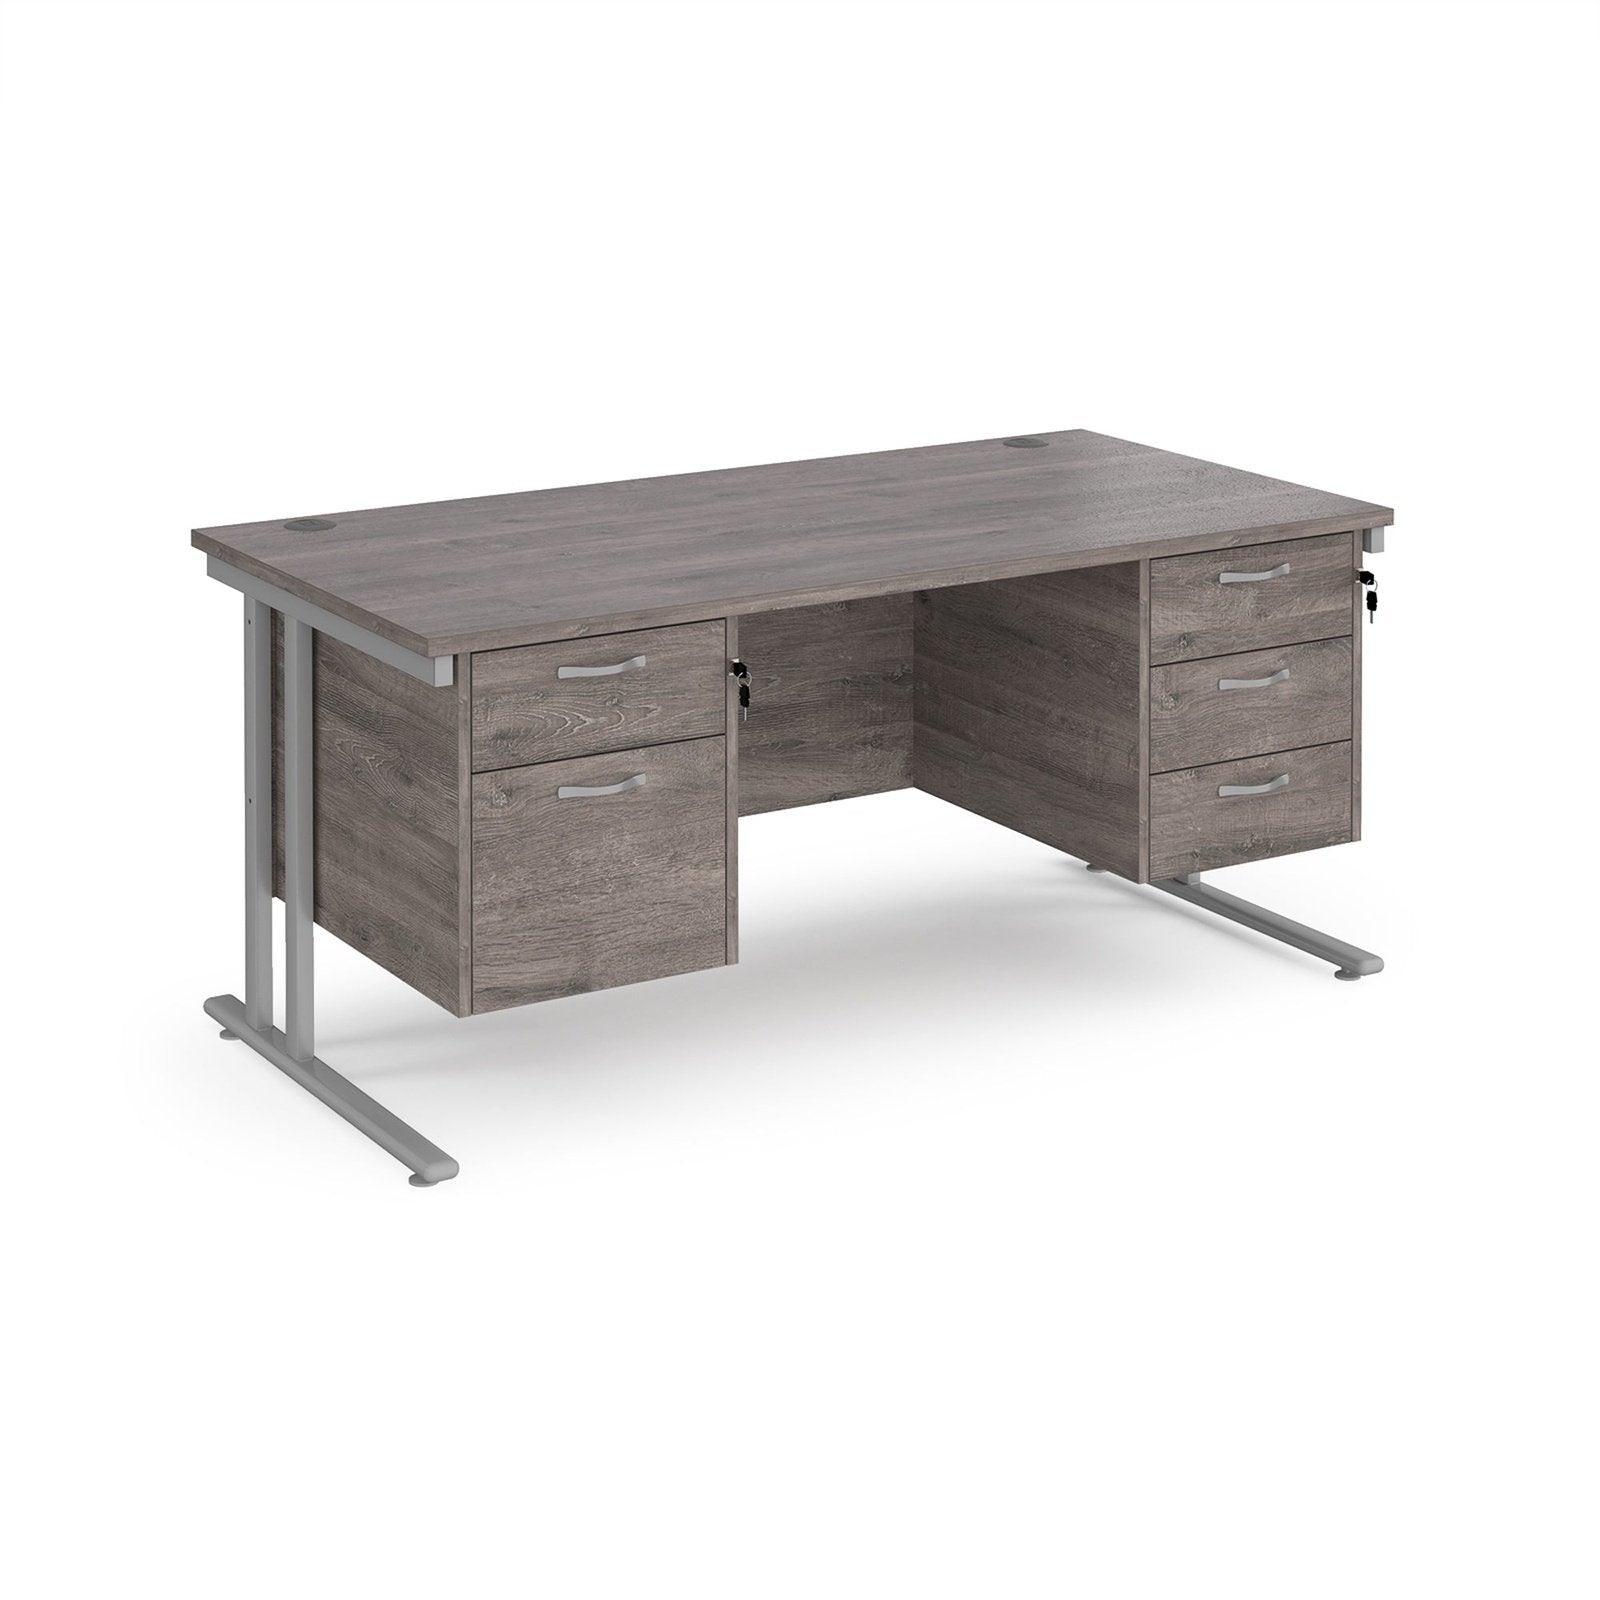 Maestro 25 cantilever leg straight desk 800 deep with 2 and 3 drawer pedestals - Office Products Online